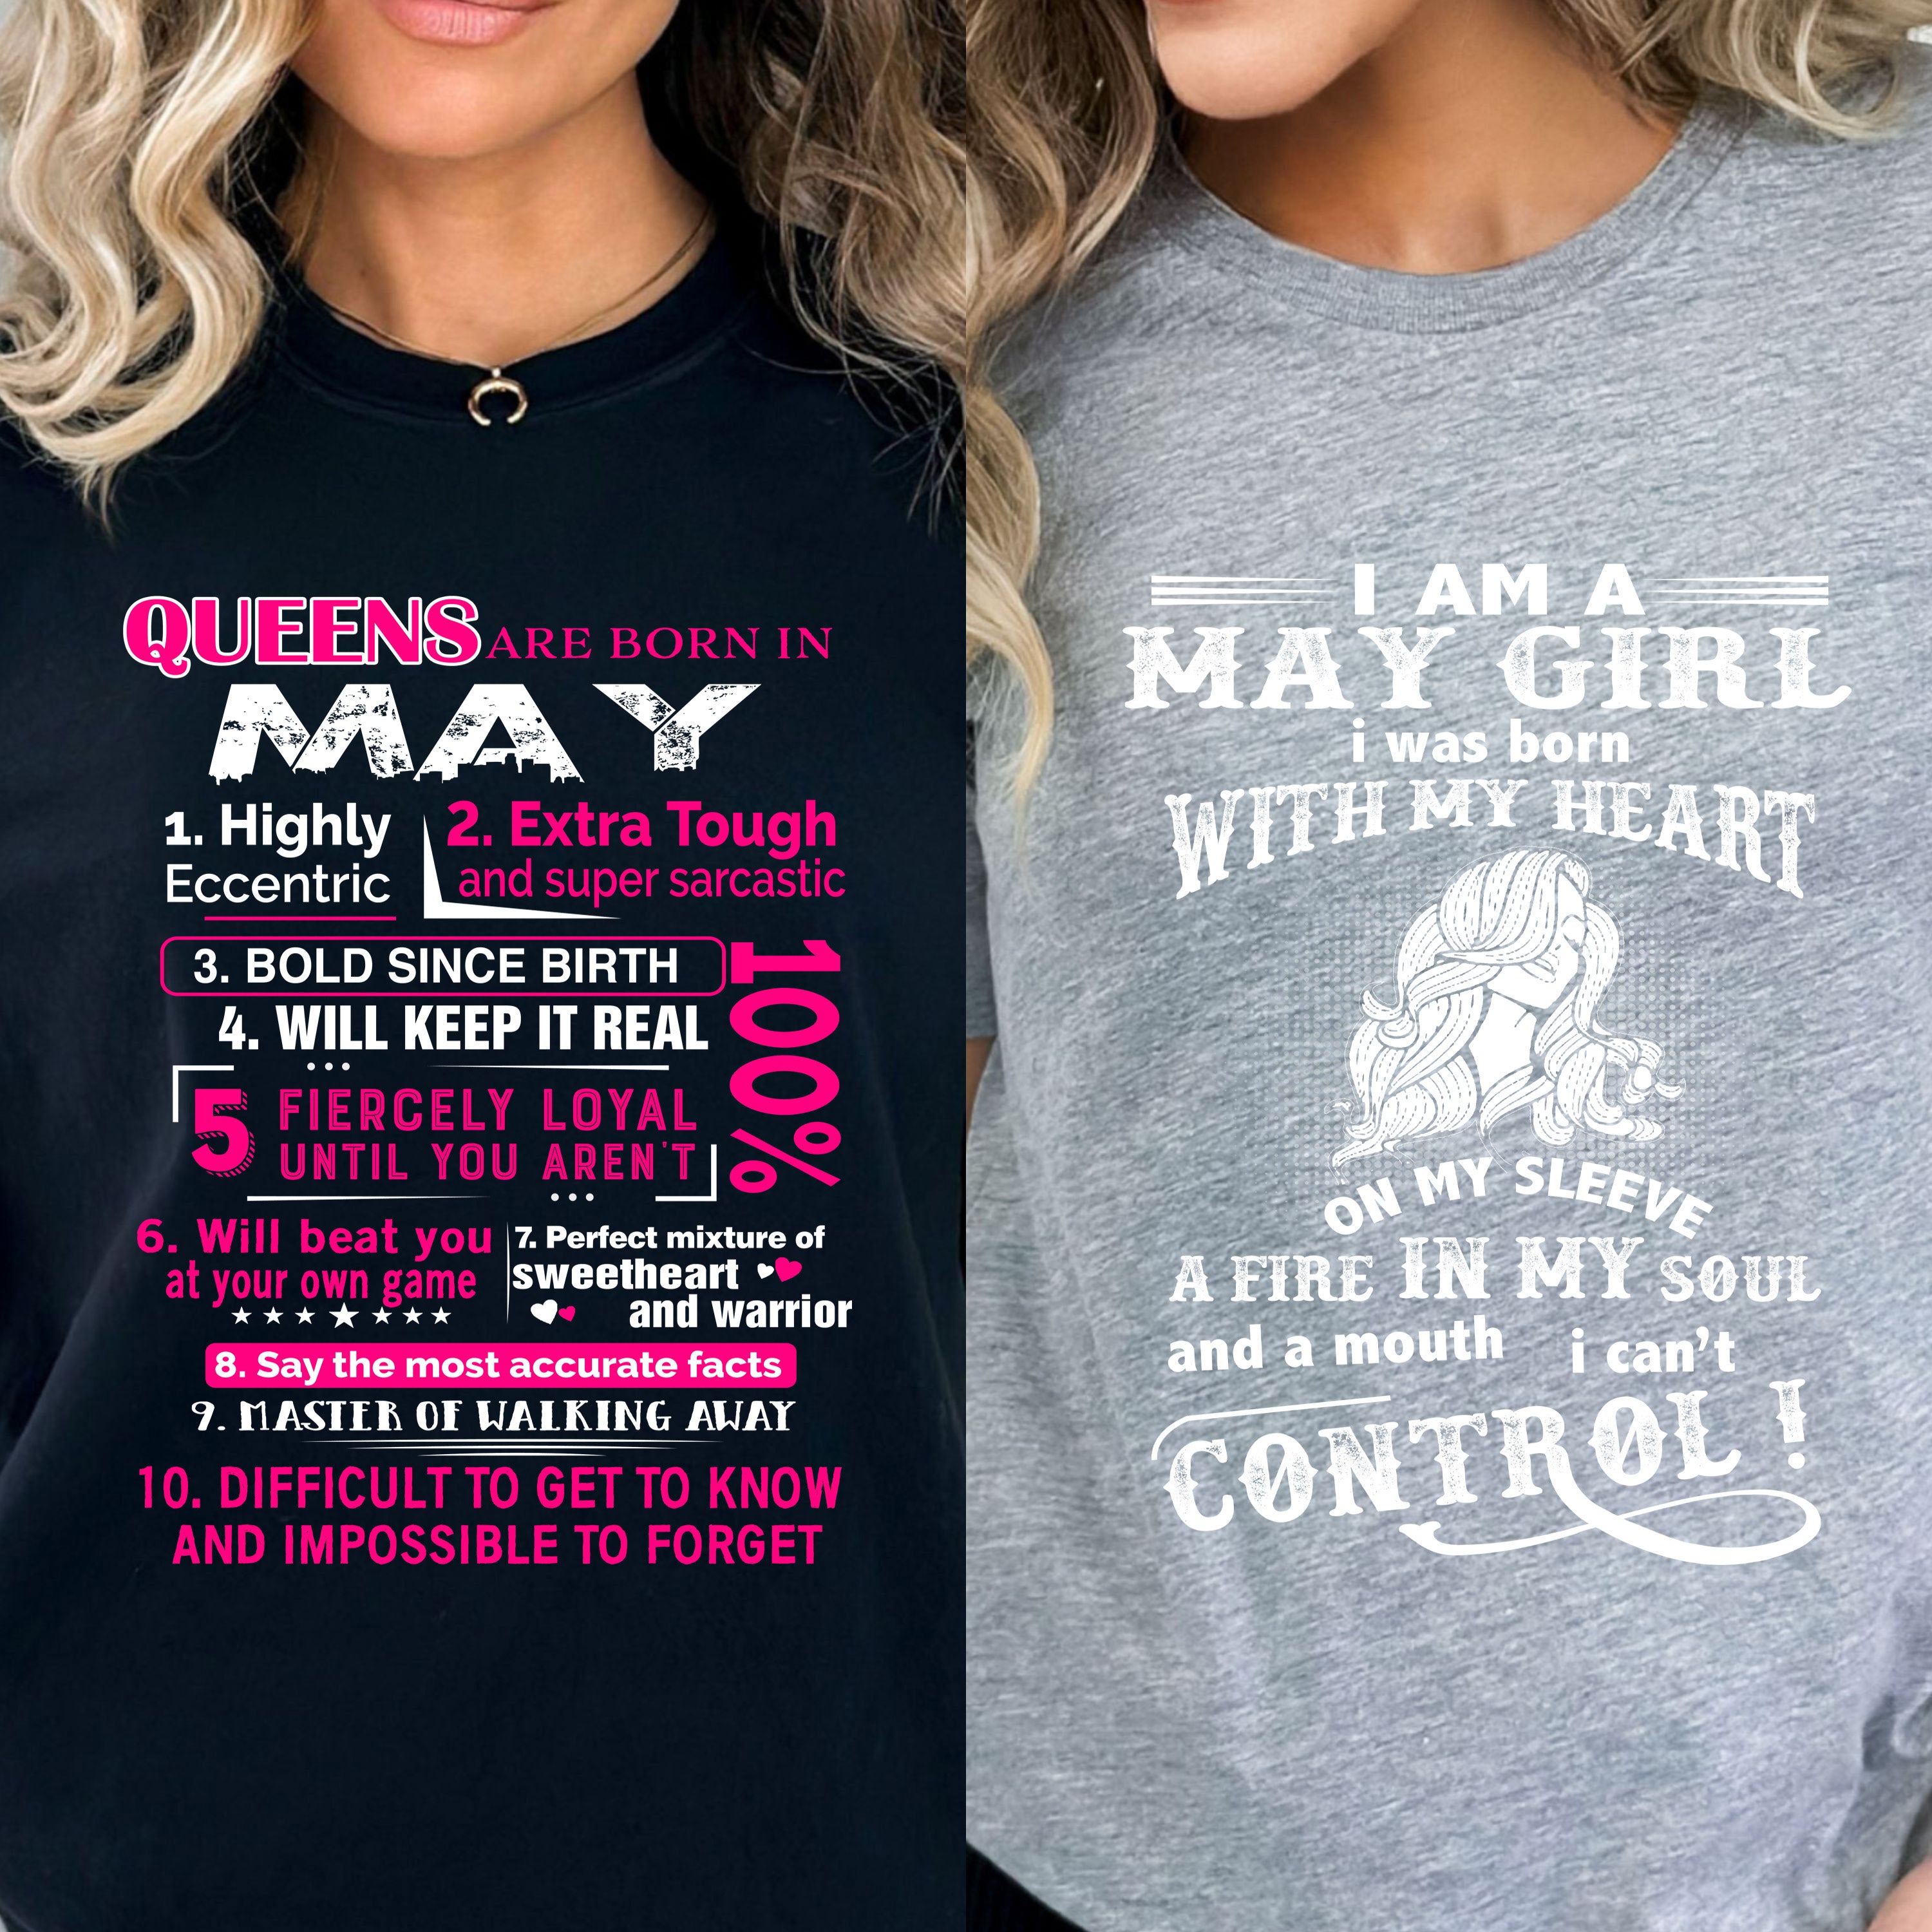 "May Queens + Control-Pack of 2".